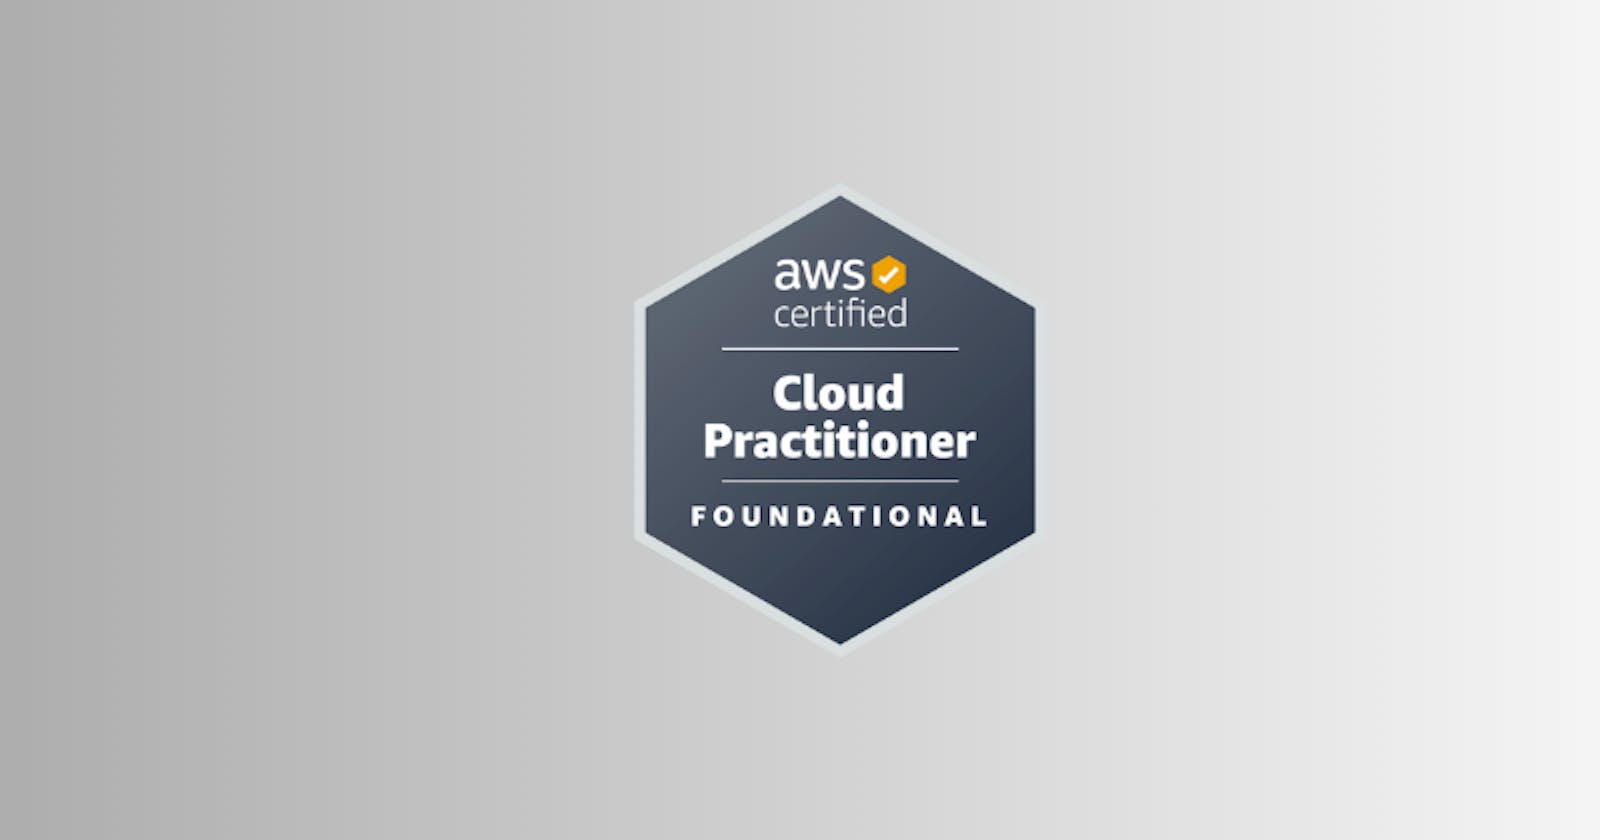 Starting My AWS Certification Journey as a Certified Cloud Practitioner